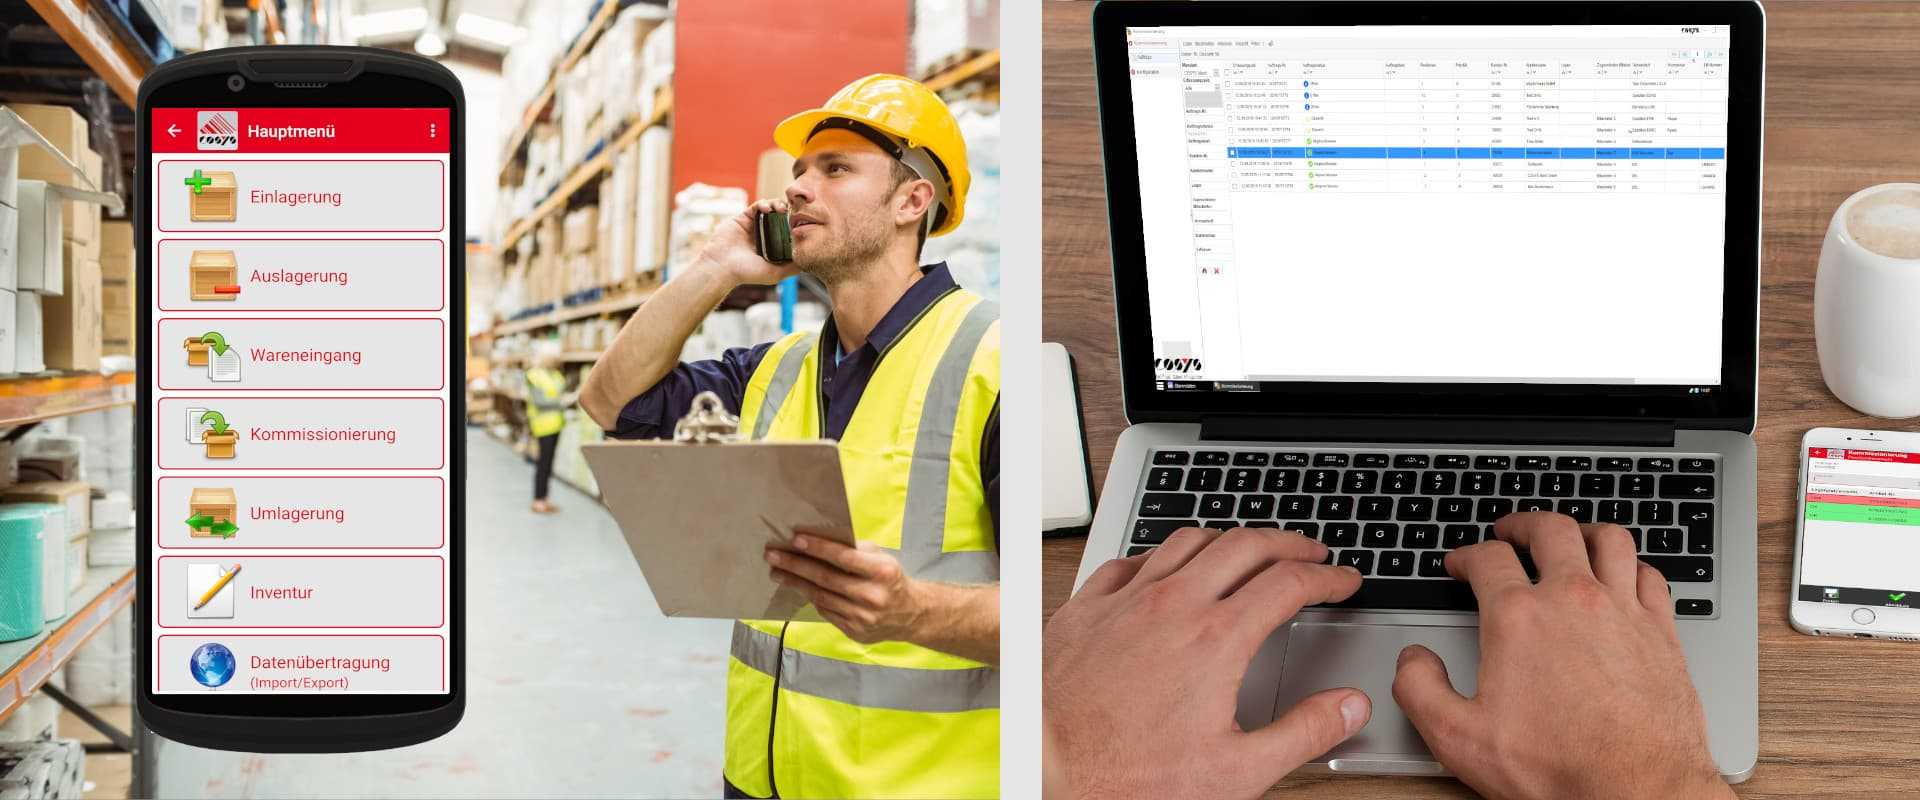 COSYS Warehouse Management System